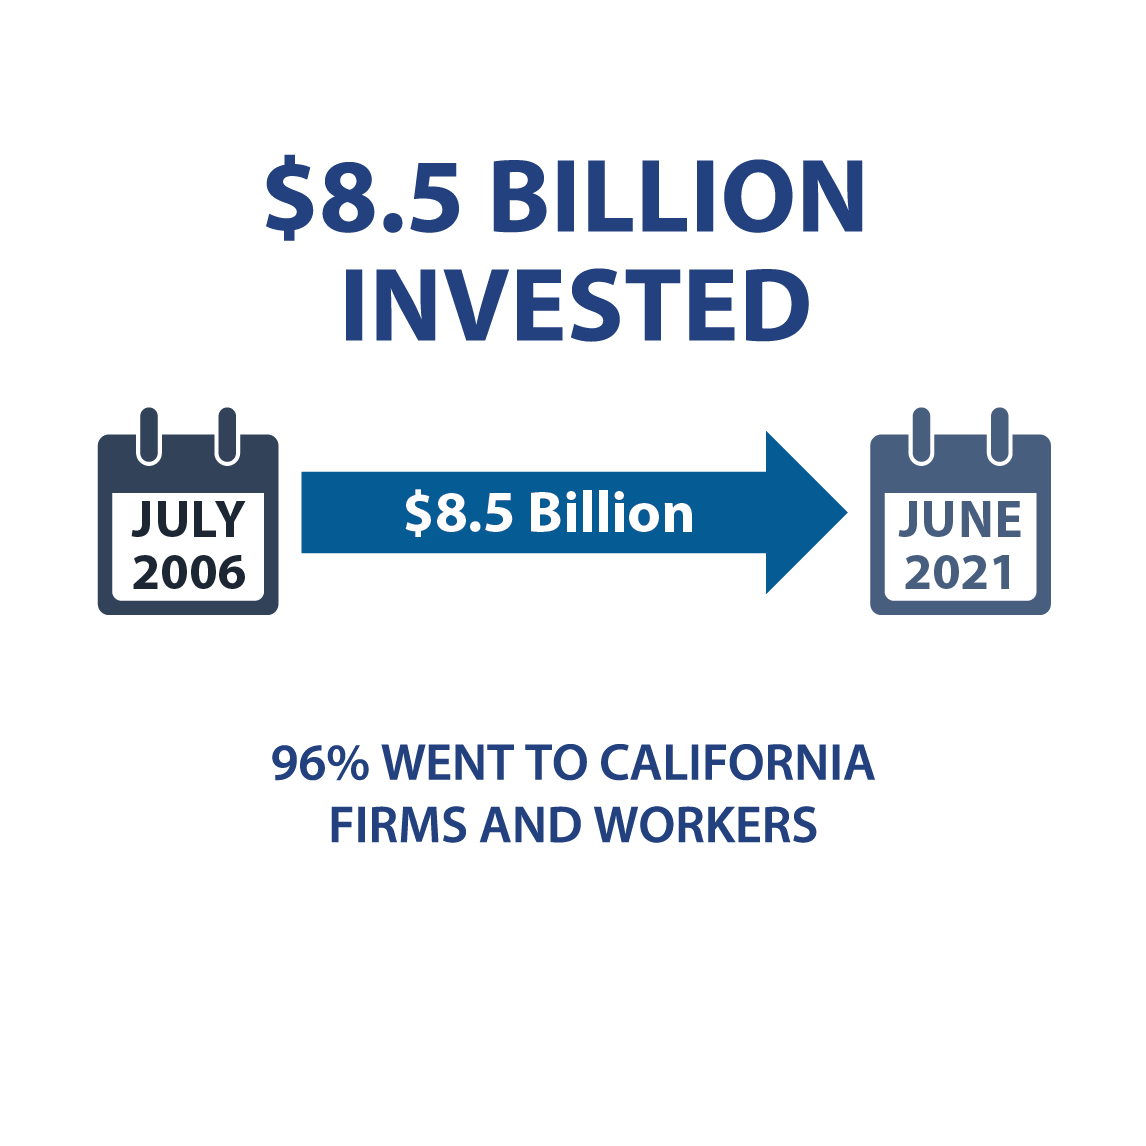 $7.2 billion invested: July 2006 > $7.2 Billion > June 2020 97% went to California firms and workers